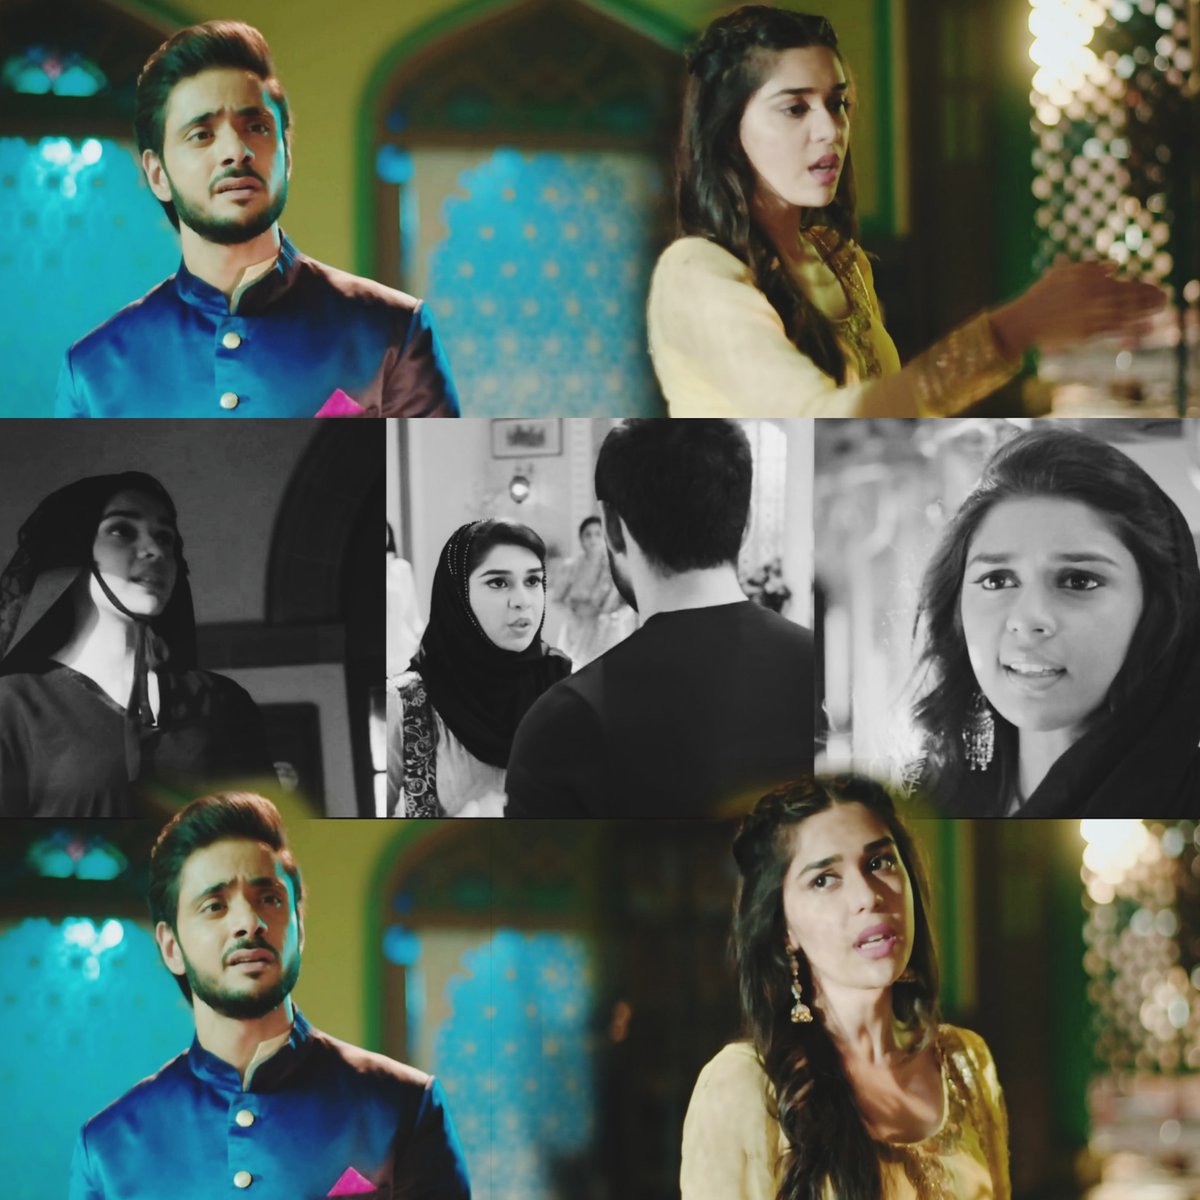 Ishq Jaaniyaaaa...... This scene is enough to say KABEER AHMED loved ZARA for the person she is not just her physical appearance  #ishqsubhanallah #zabeer